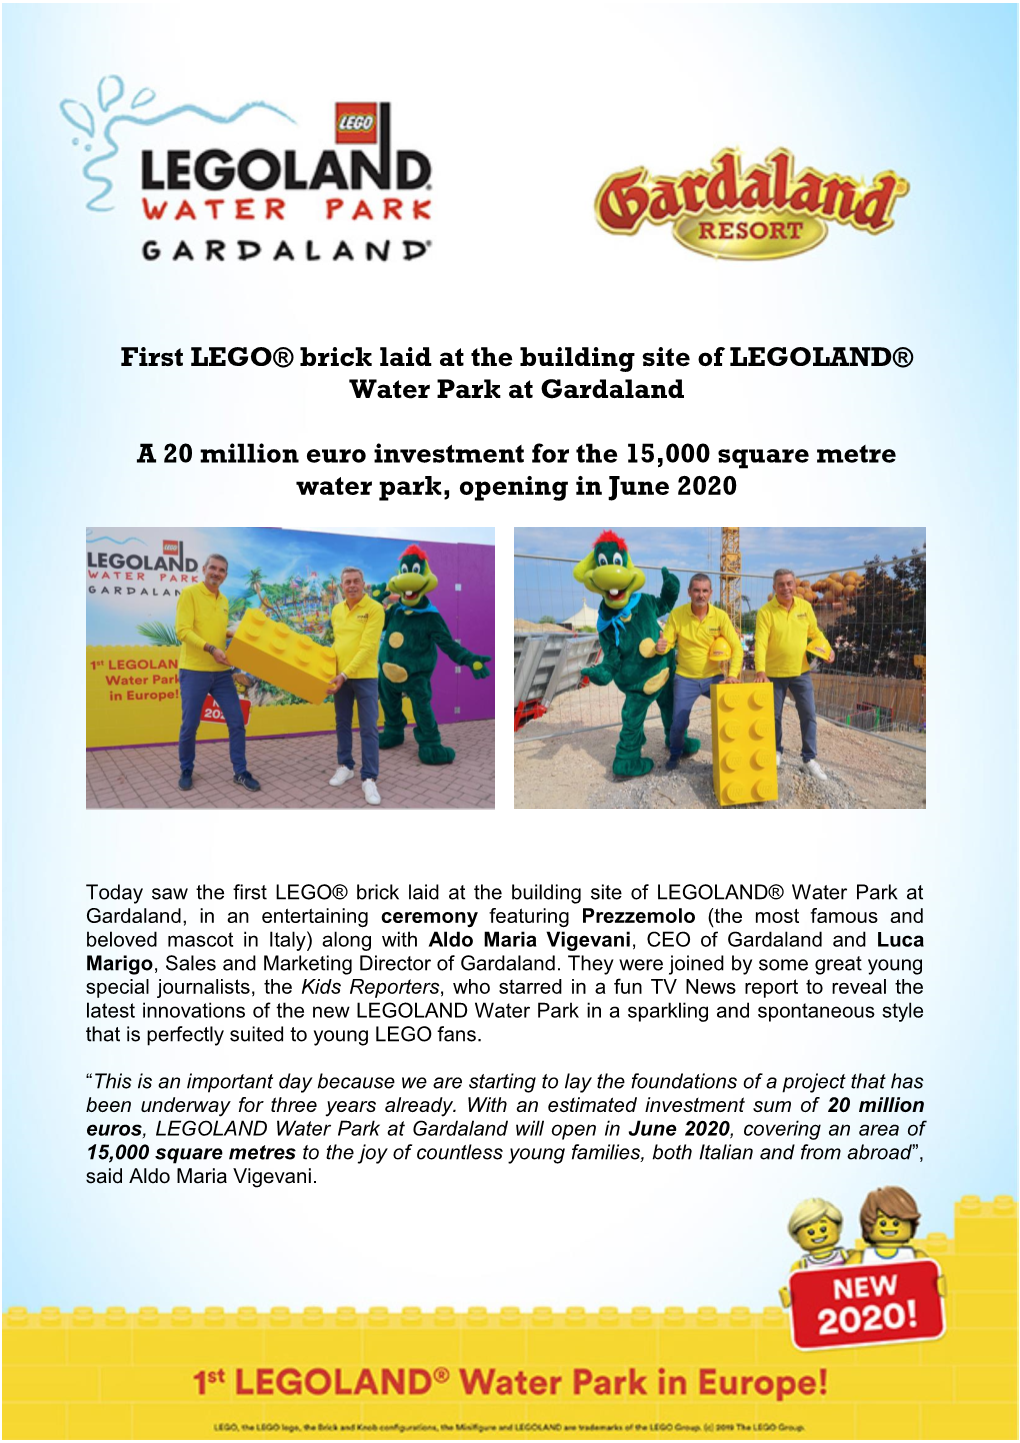 First LEGO® Brick Laid at the Building Site of LEGOLAND® Water Park at Gardaland